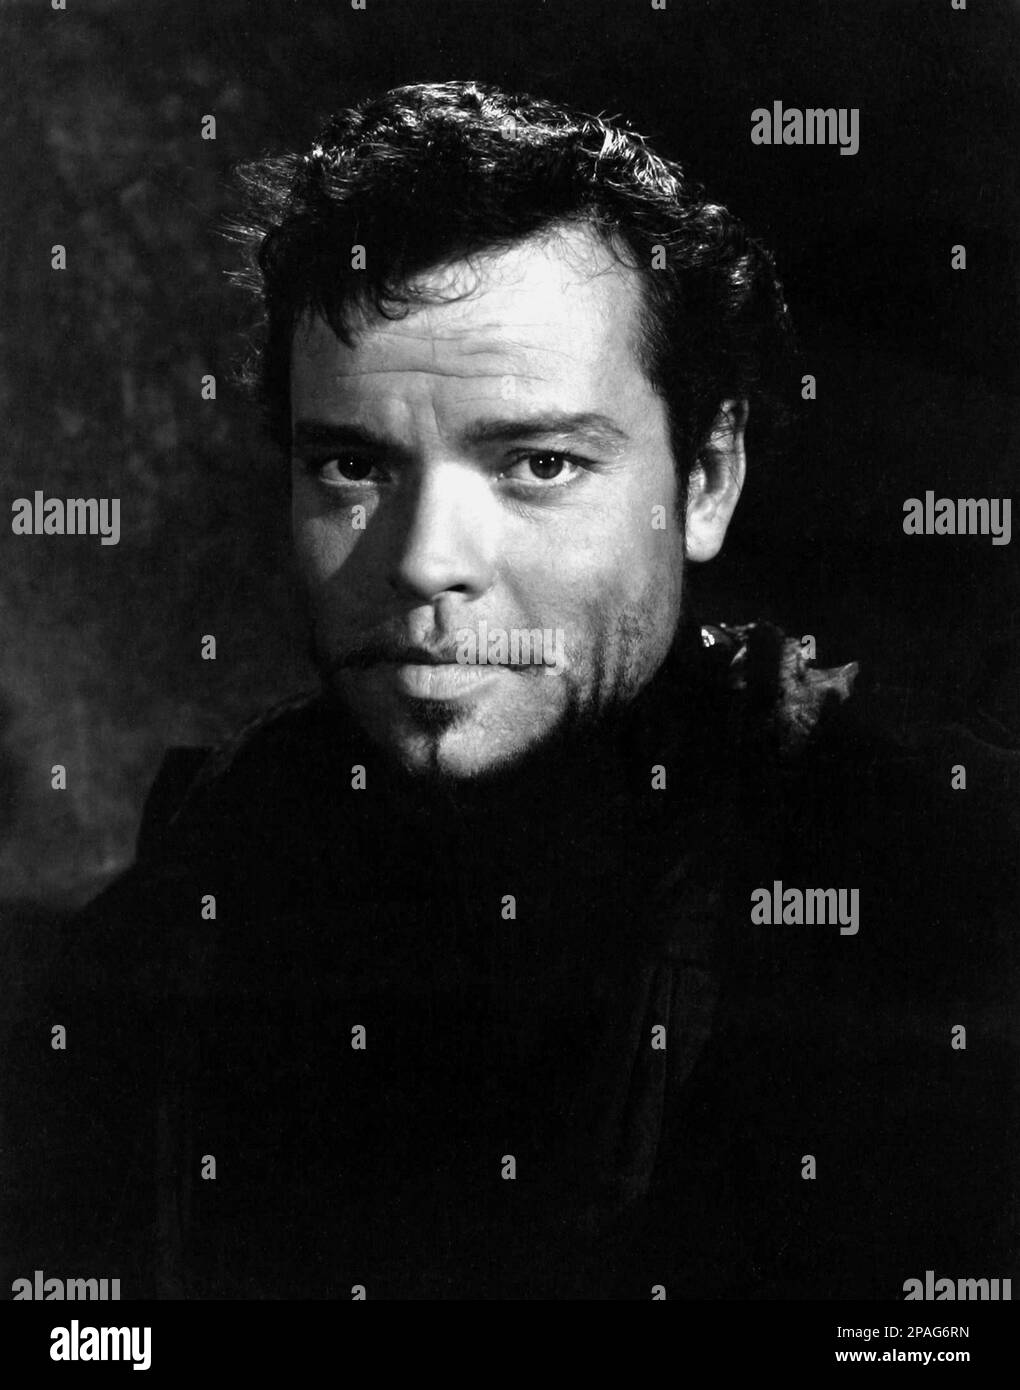 1949 : The  movie actor ORSON WELLES ( 1915 - 1985 ) as CESARE BORGIA  in a pubblicitary shot  for PRINCE OF FOXES by Henry King  , from a novel by Samuel Shellabarger - FILM - CINEMA - ATTORE CINEMATOGRAFICO  -  NOT FOR ADVERTISING PUBBLICITARY USE ---- NON PER USO PUBBLICITARIO ----- NOT FOR GADGETS  ----      ARCHIVIO GBB Stock Photo